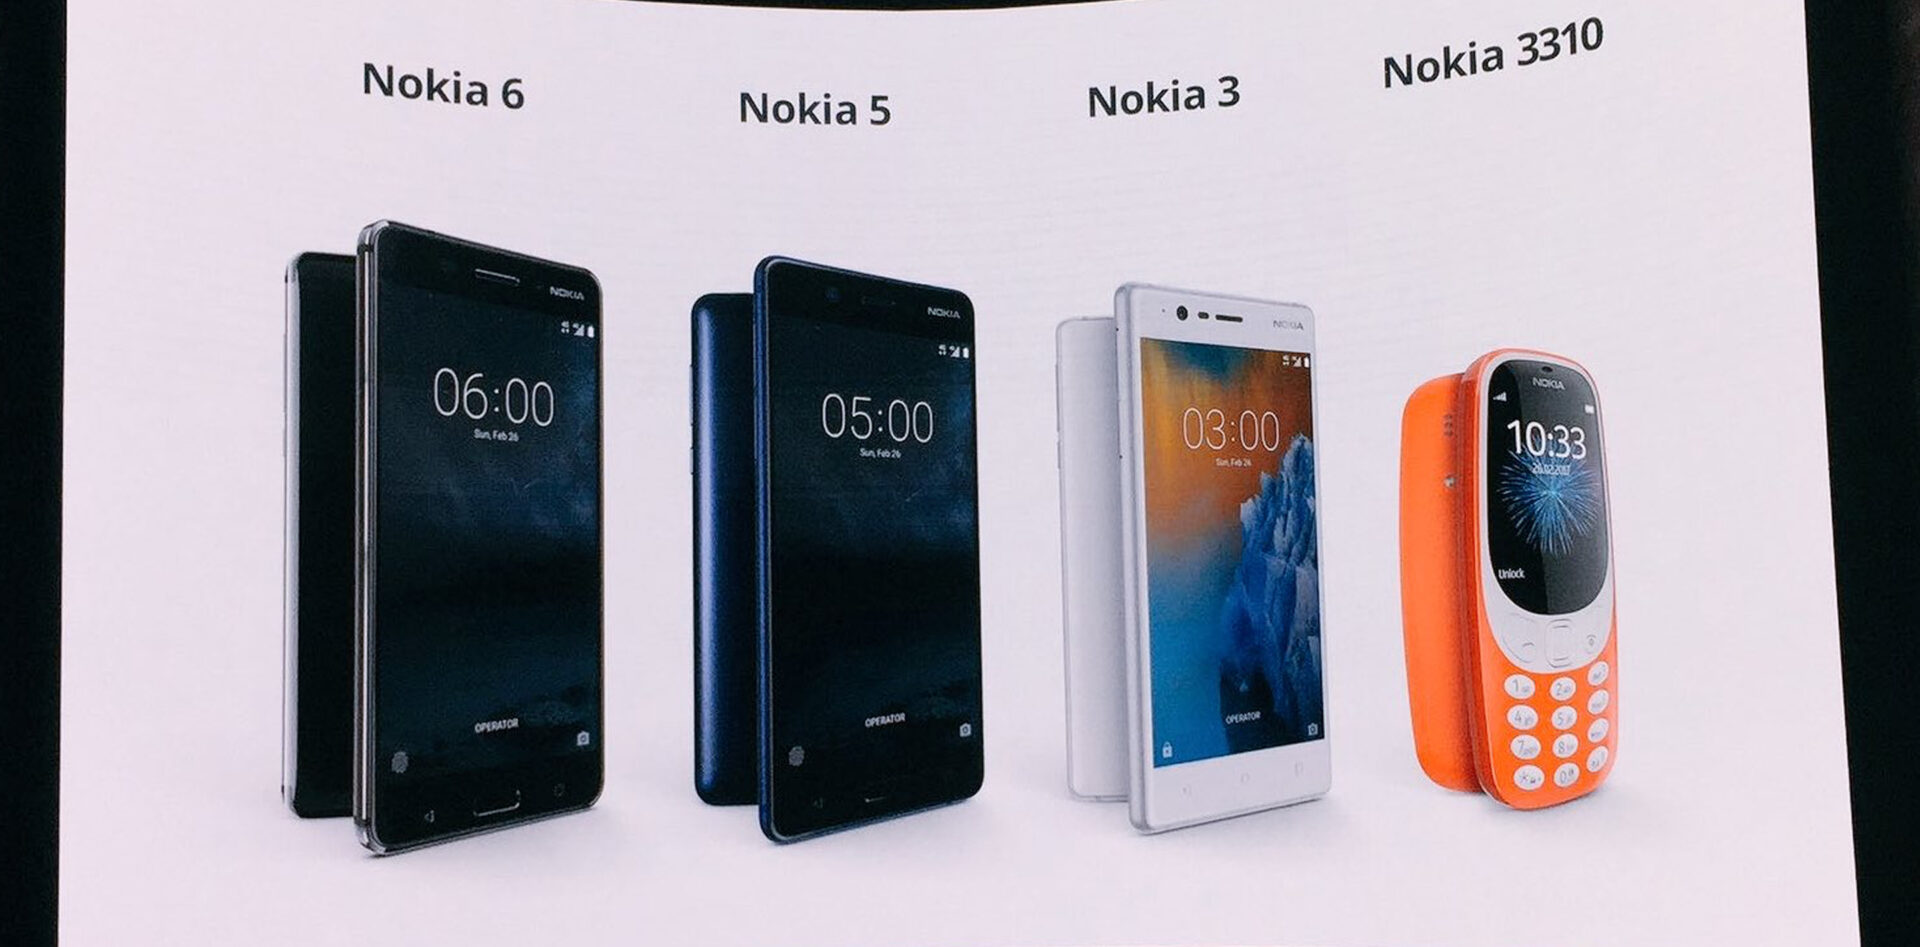 Nokia 6, 5, and 3 launched in india - everything you need to know